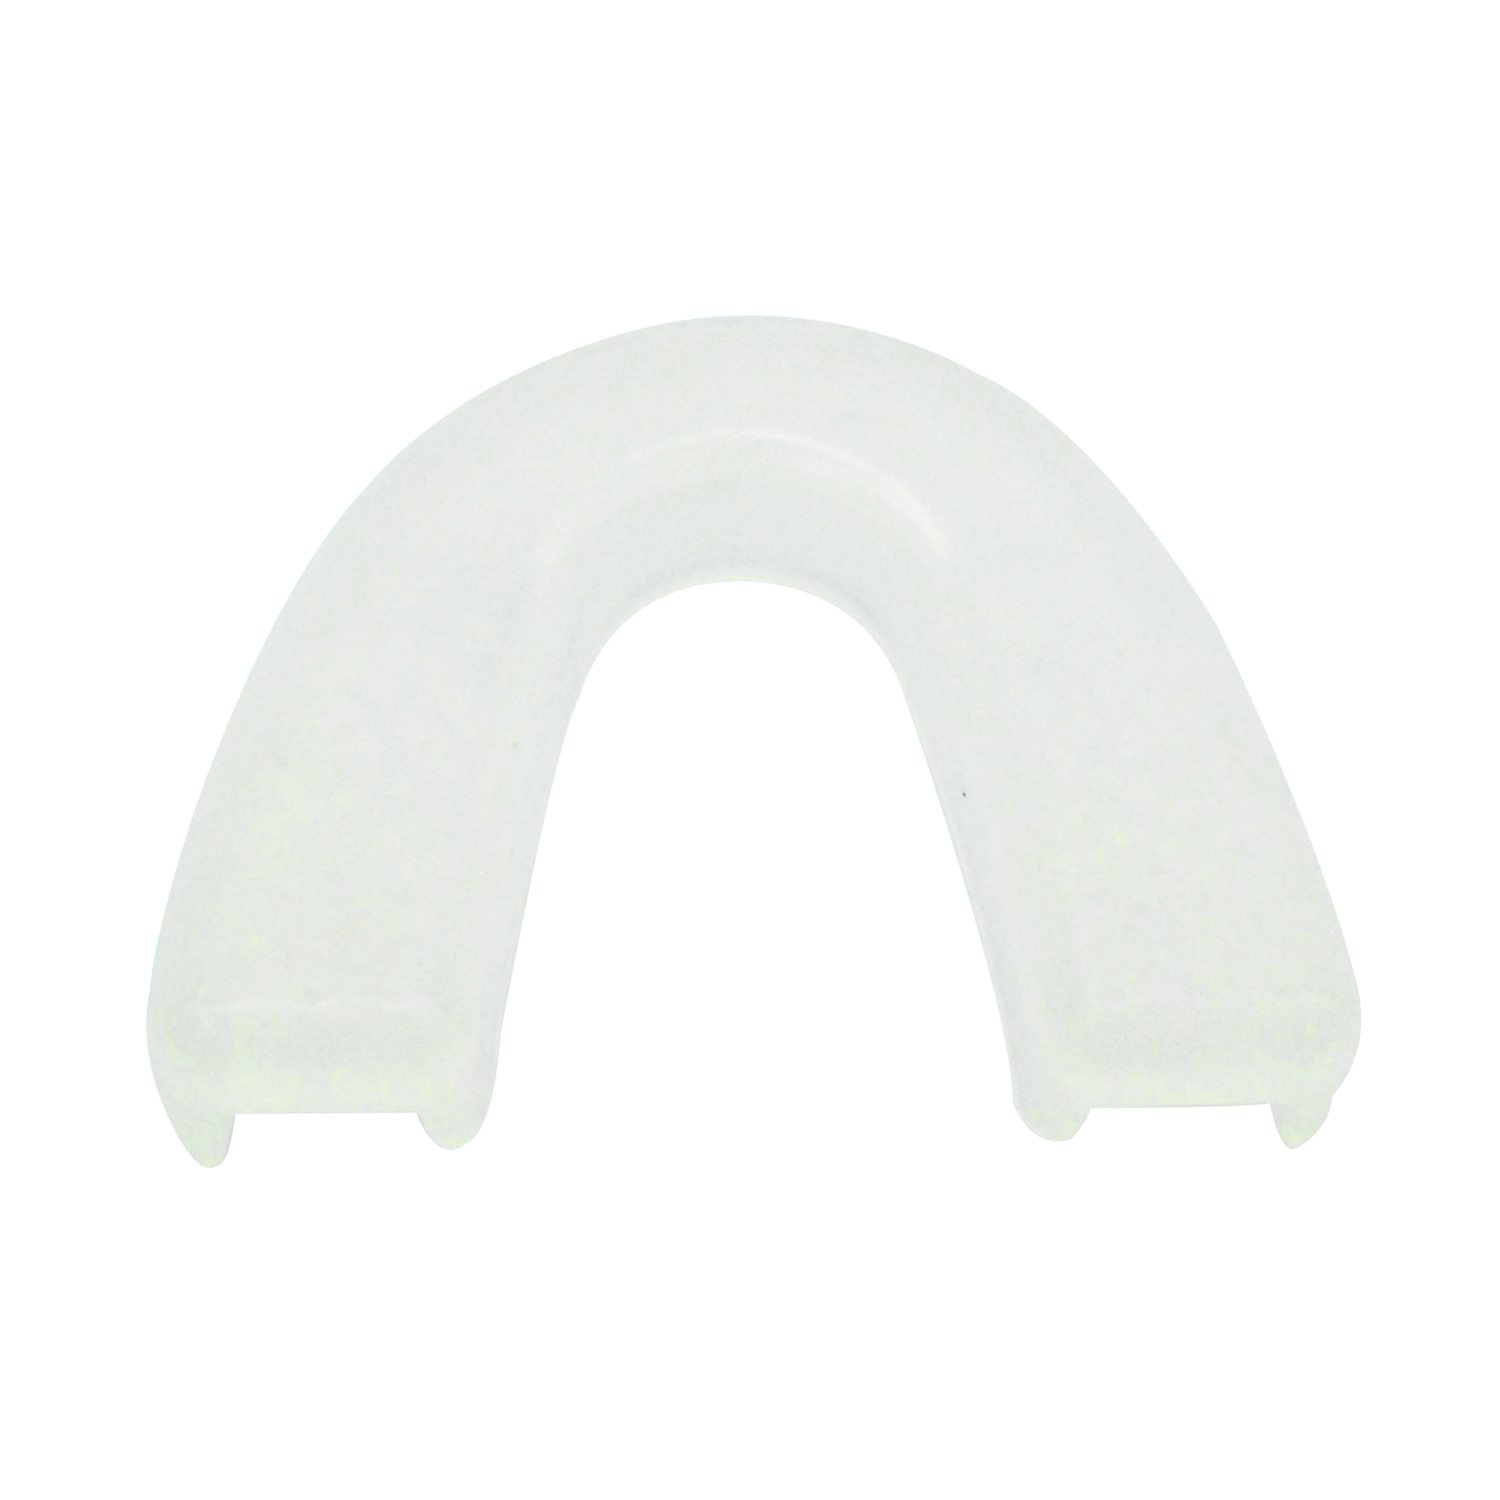 MUELLER® MUELLERGUARD W/O STRAP CLEAR, , large image number null